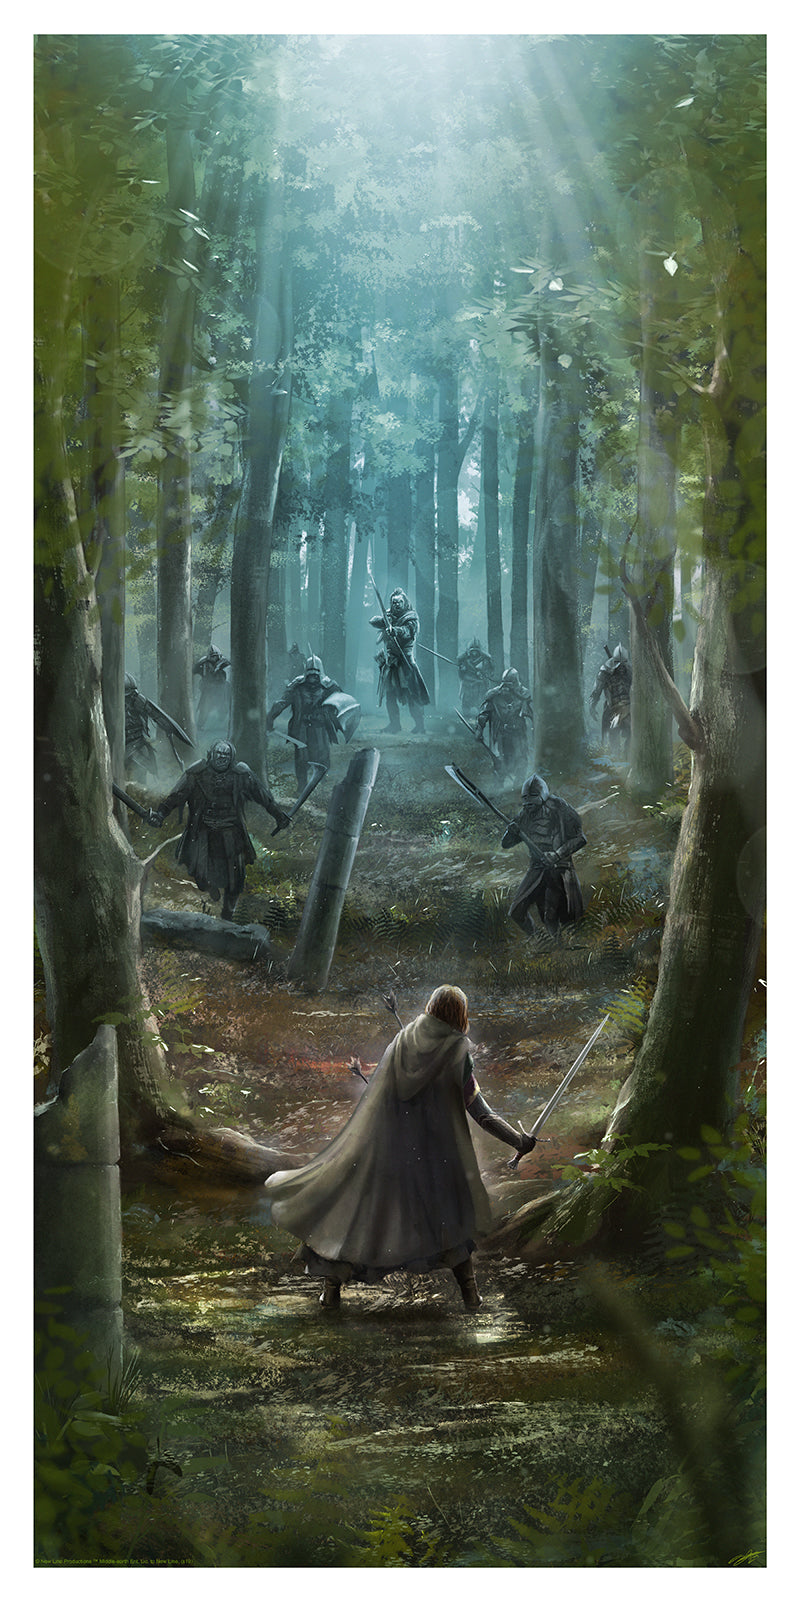 Andy Fairhurst "The Lord of the Rings - Boromir"